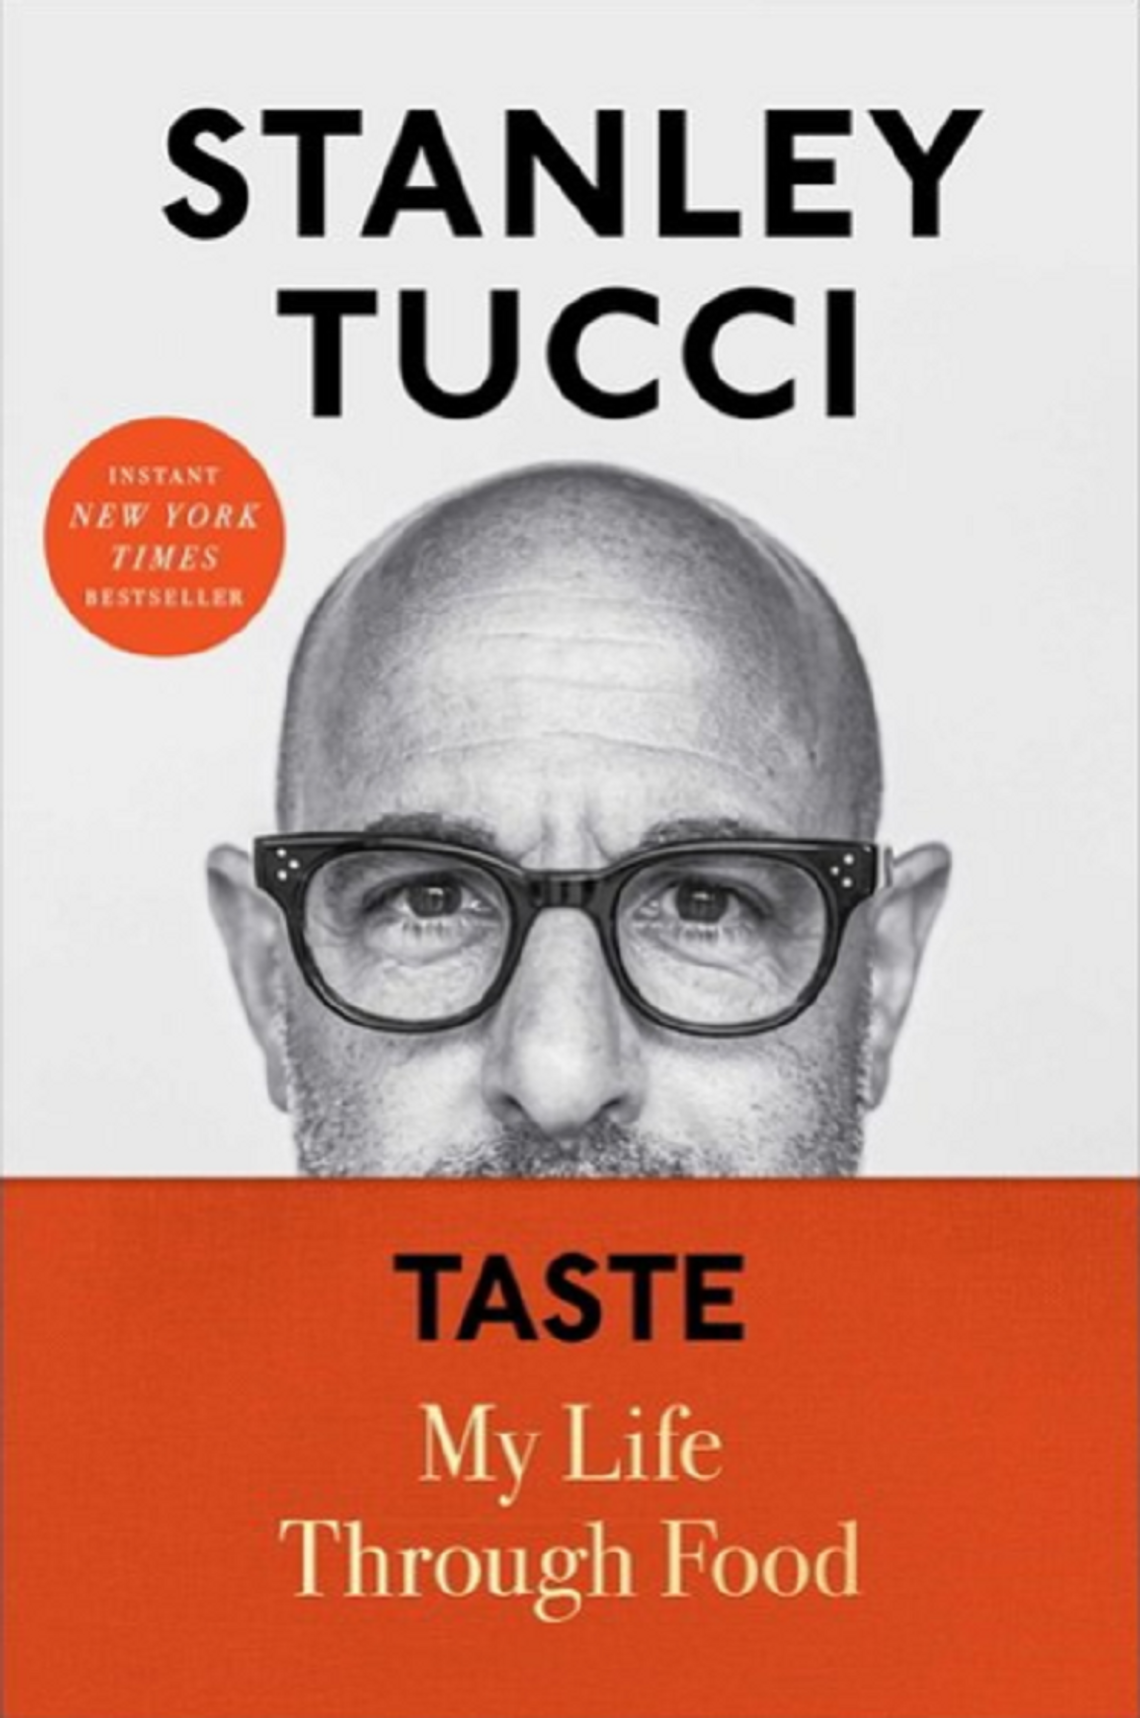 Book Review -- Taste: My Life Through Food by Stanley Tucci